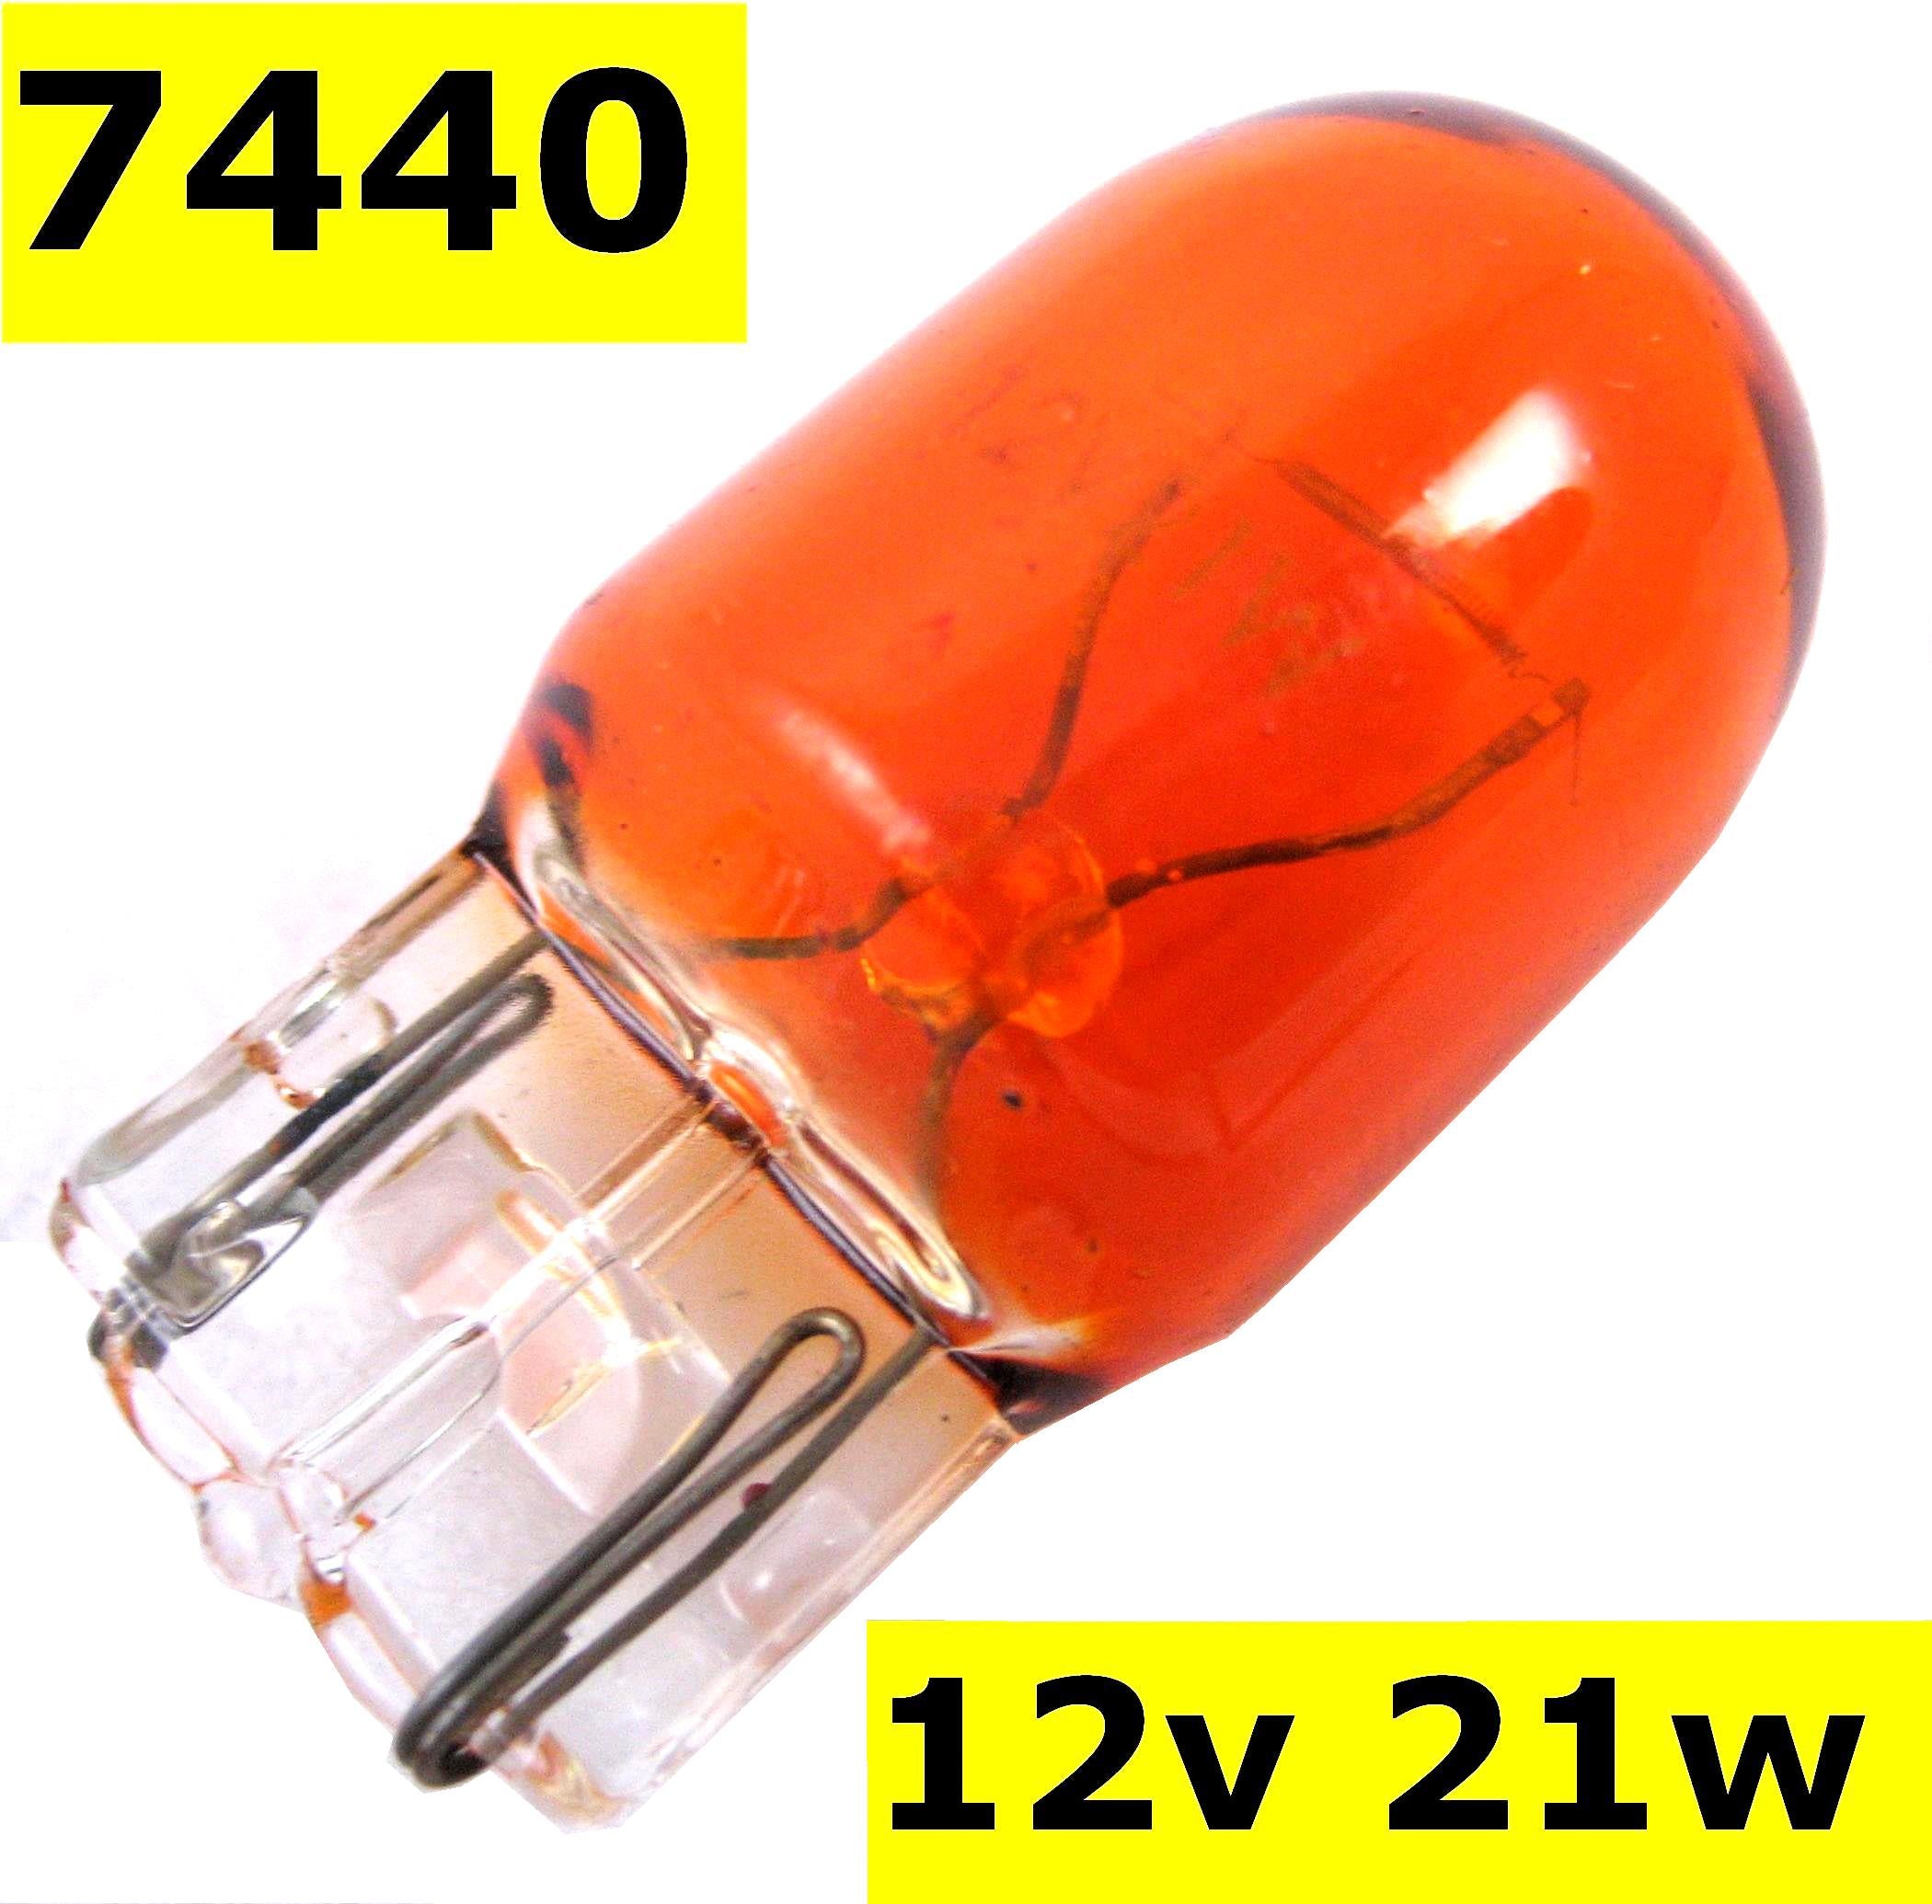 Brightest 2000 Lumen Canbus Error Free Amber LED x2 Headlight or Tail Light  Turn Signal Light Bulbs Size T20 7440 – Unique Style Racing